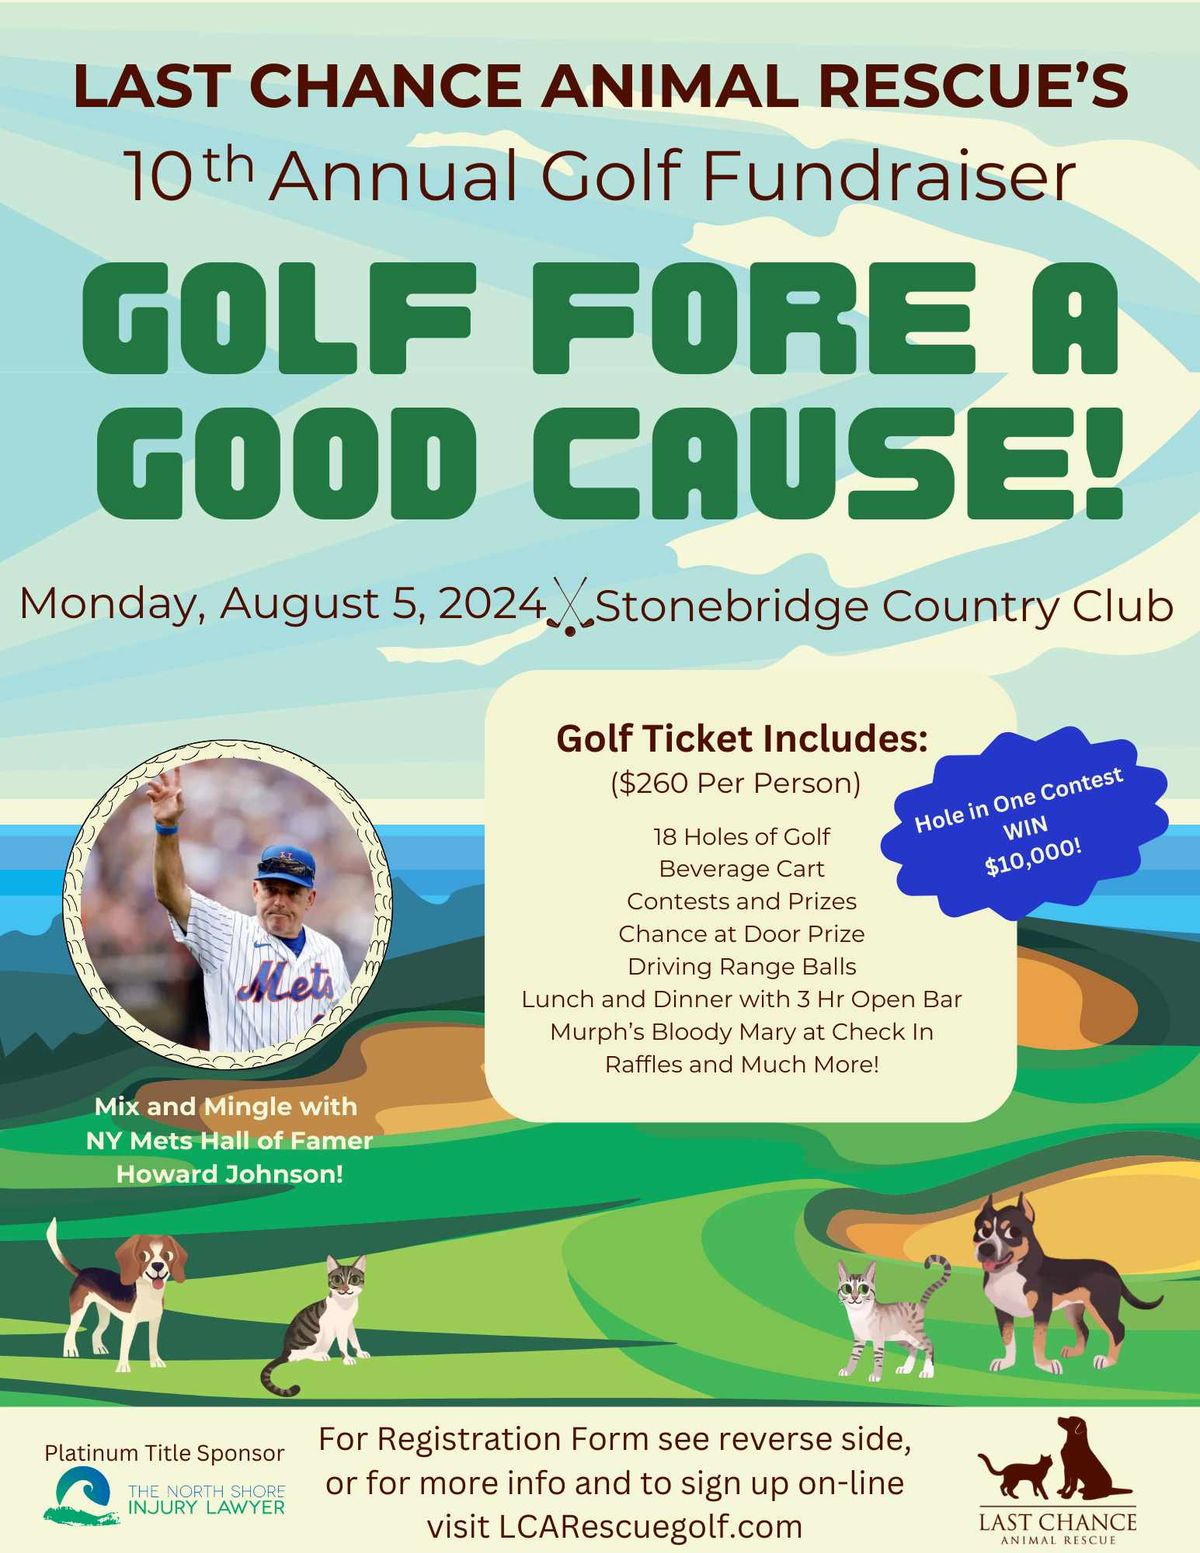 10th Annual Golf Outing to Benefit Last Chance Animal Rescue